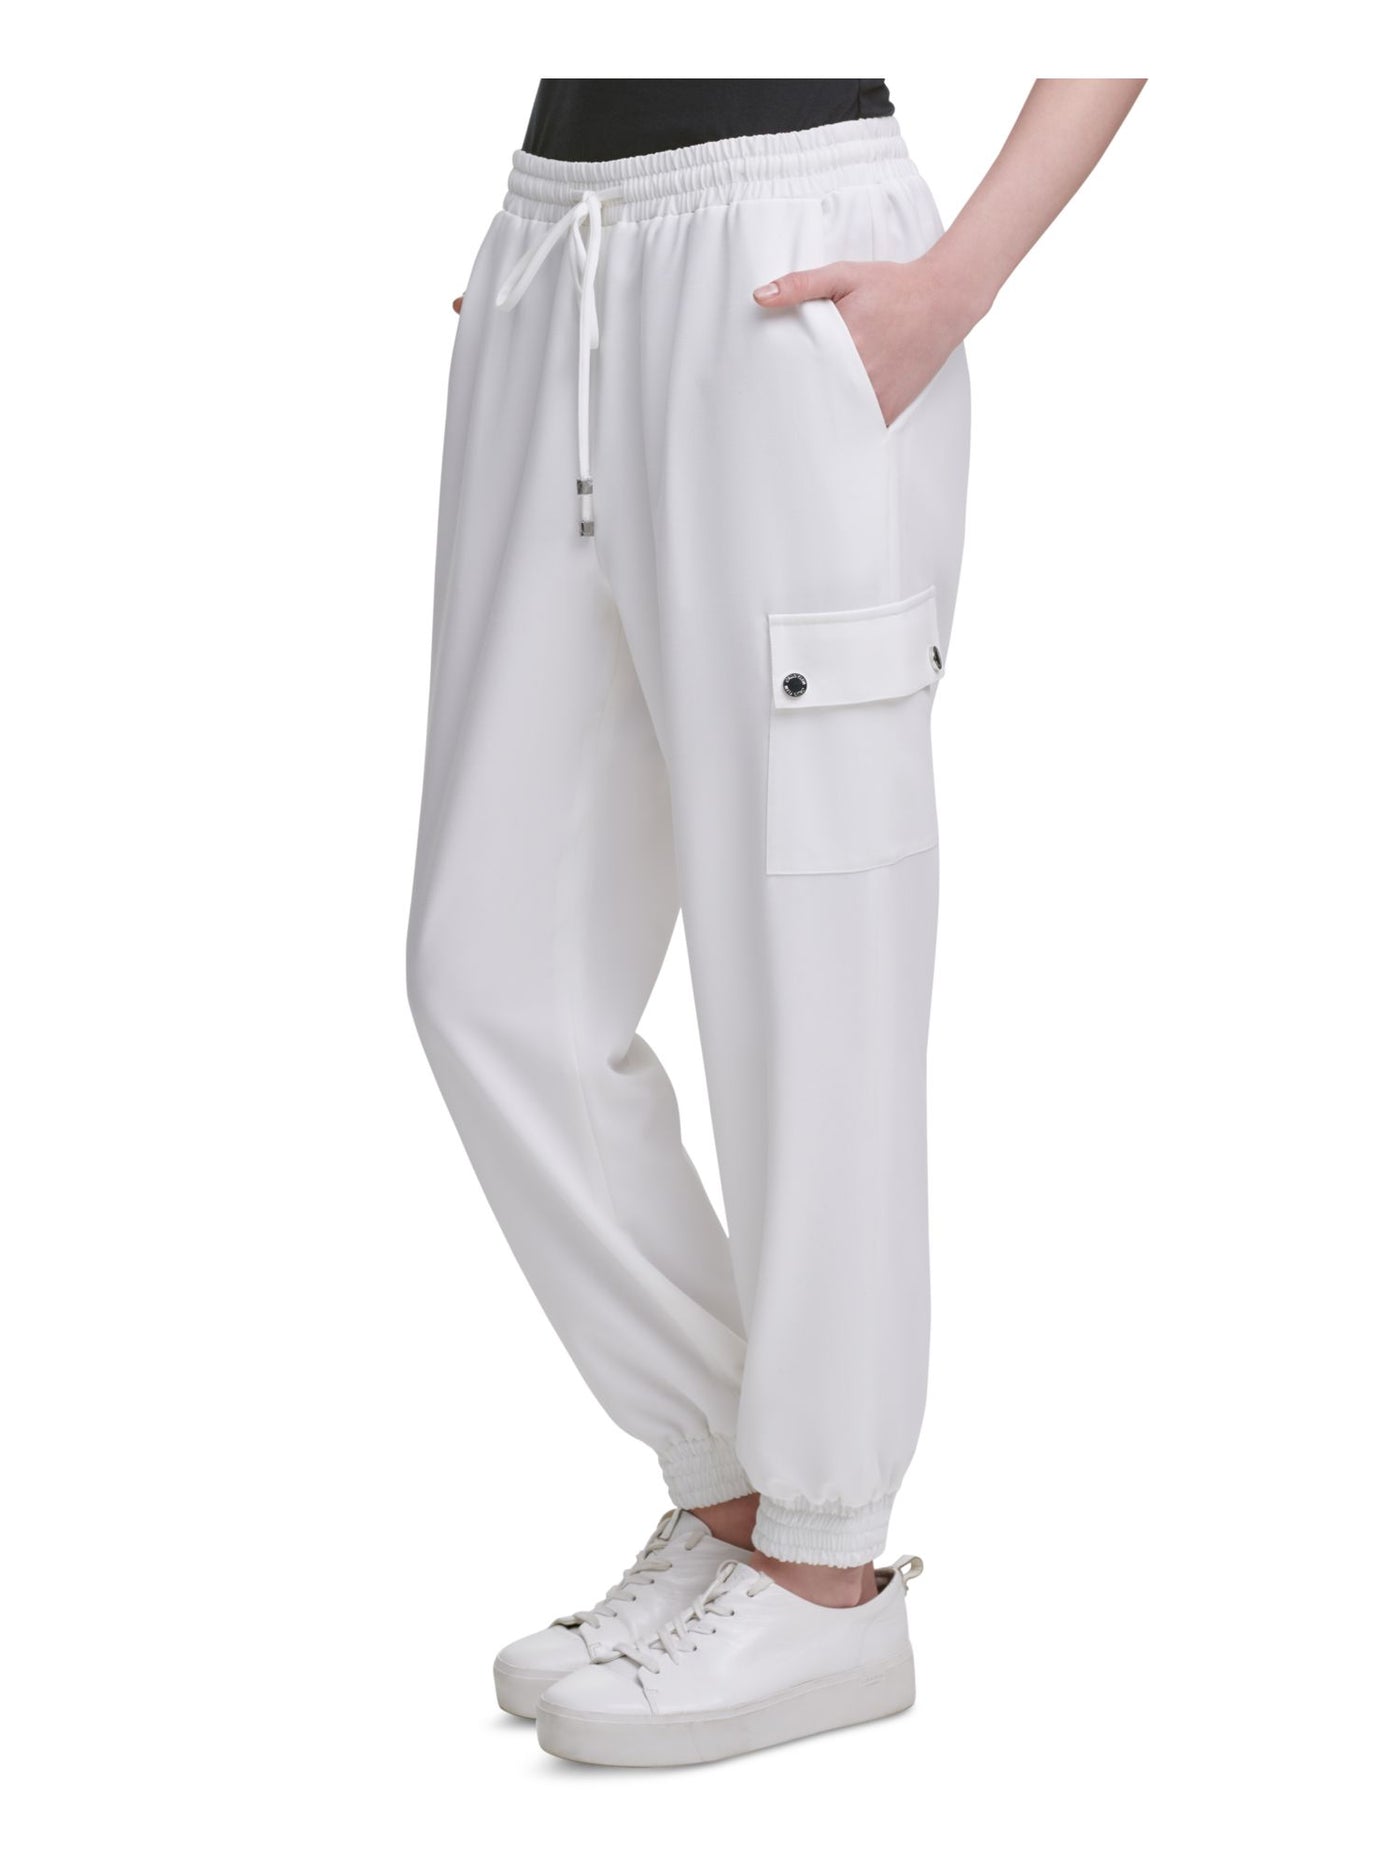 CALVIN KLEIN Womens Ivory Pocketed Lounge Pants L